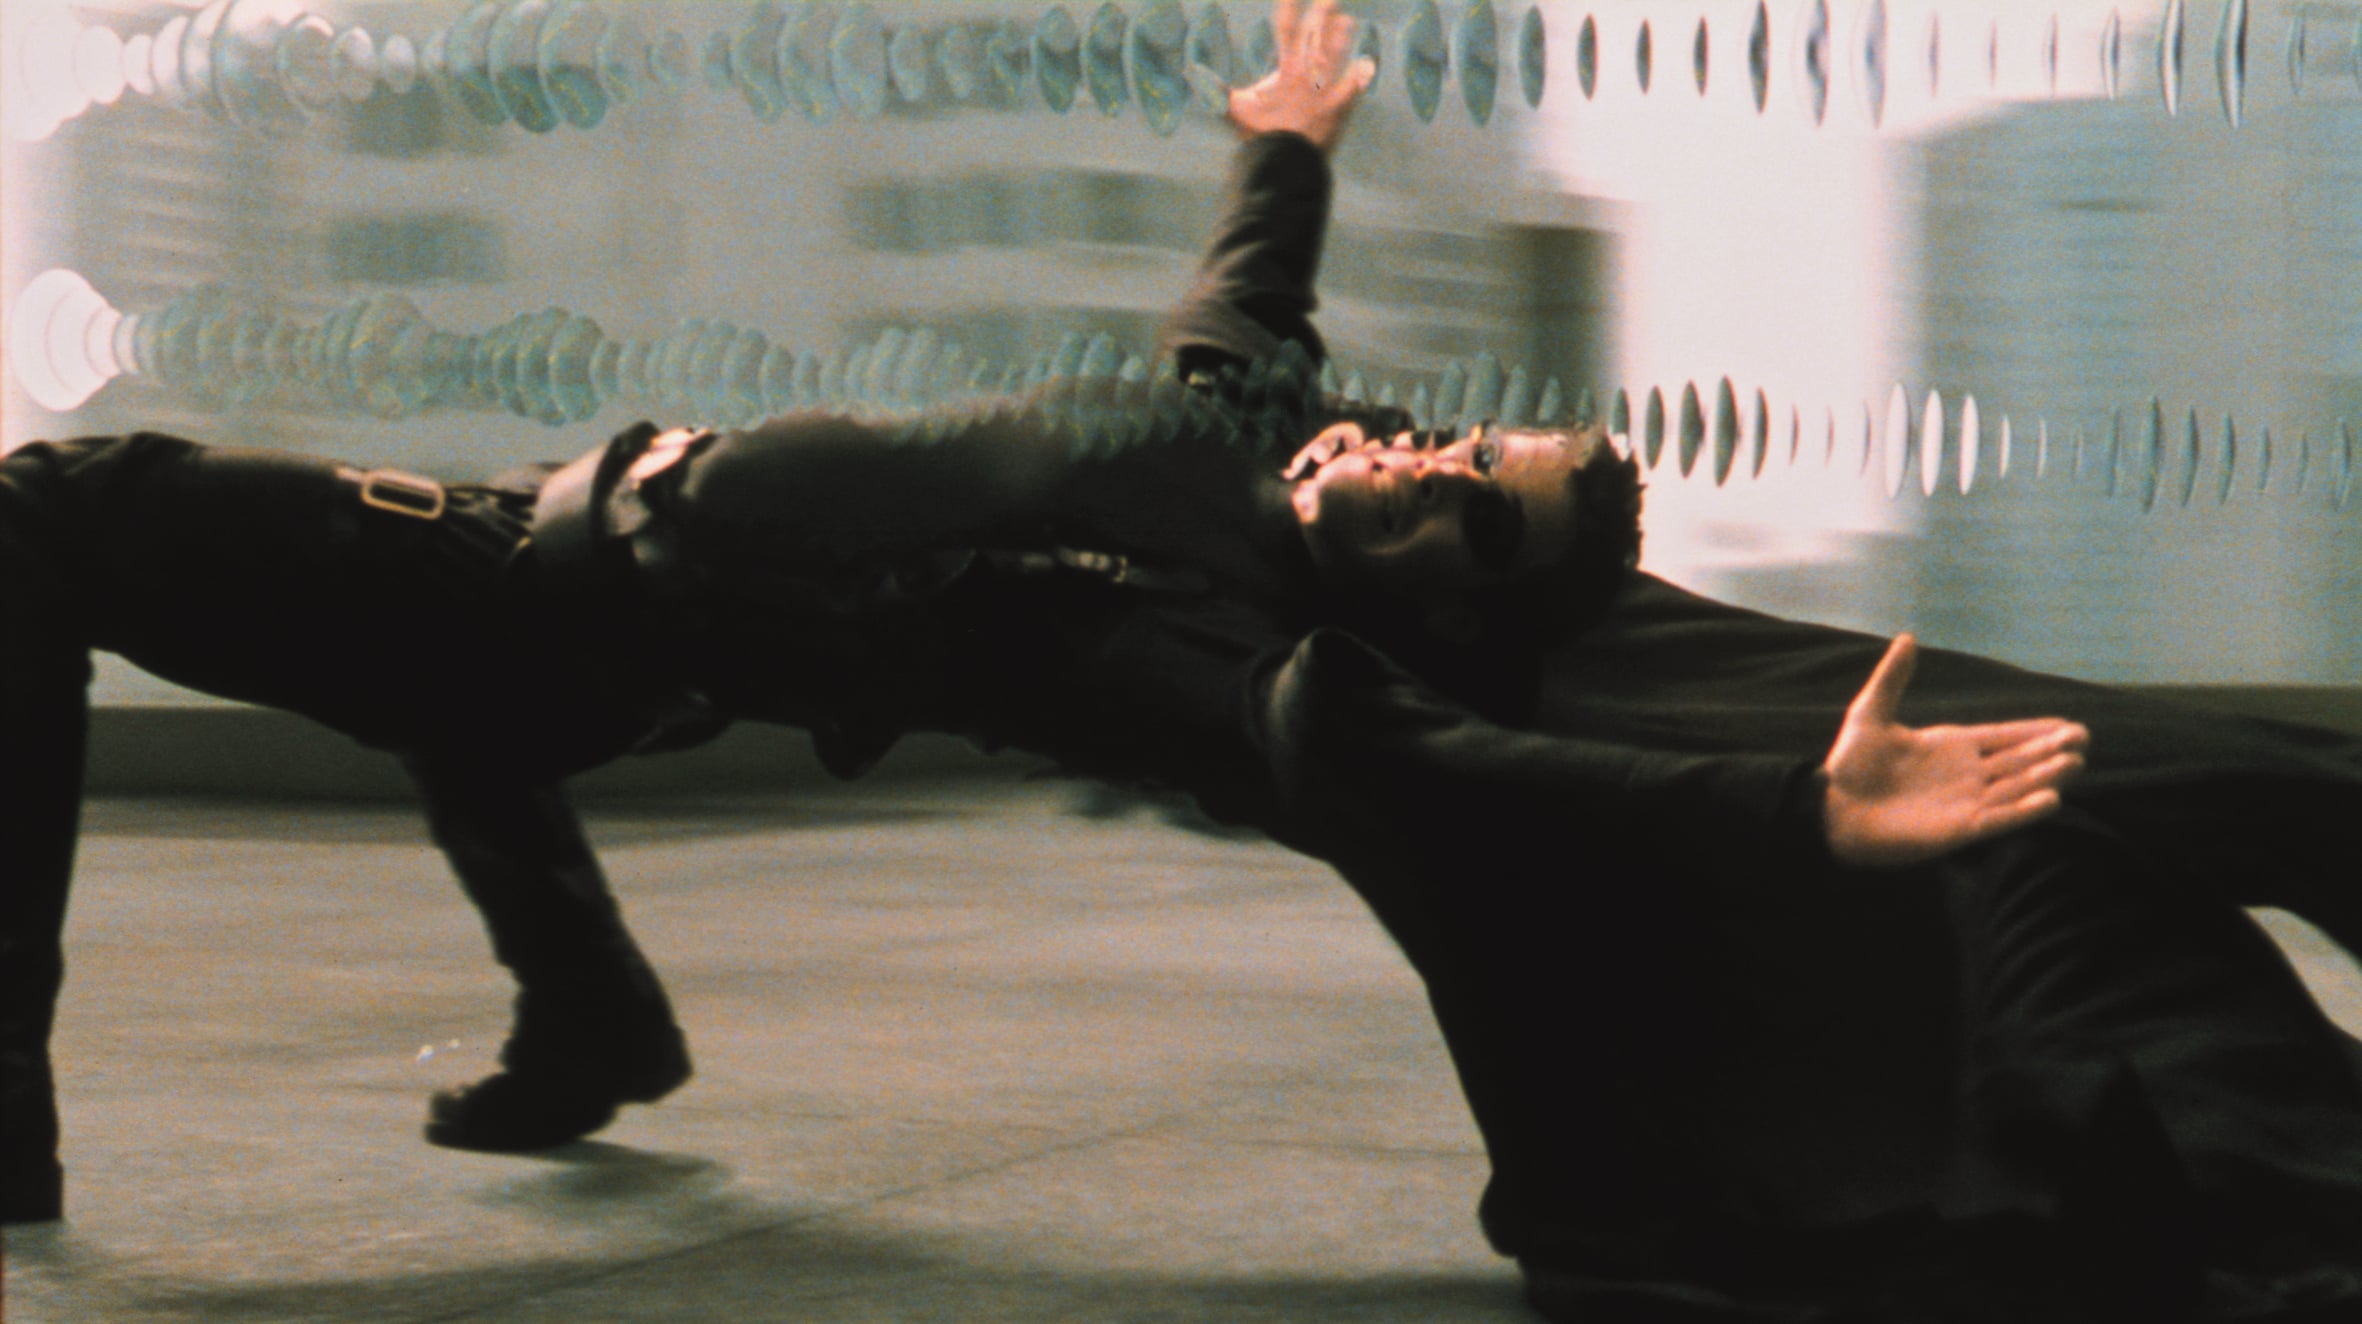 Image from the movie "Matrix"